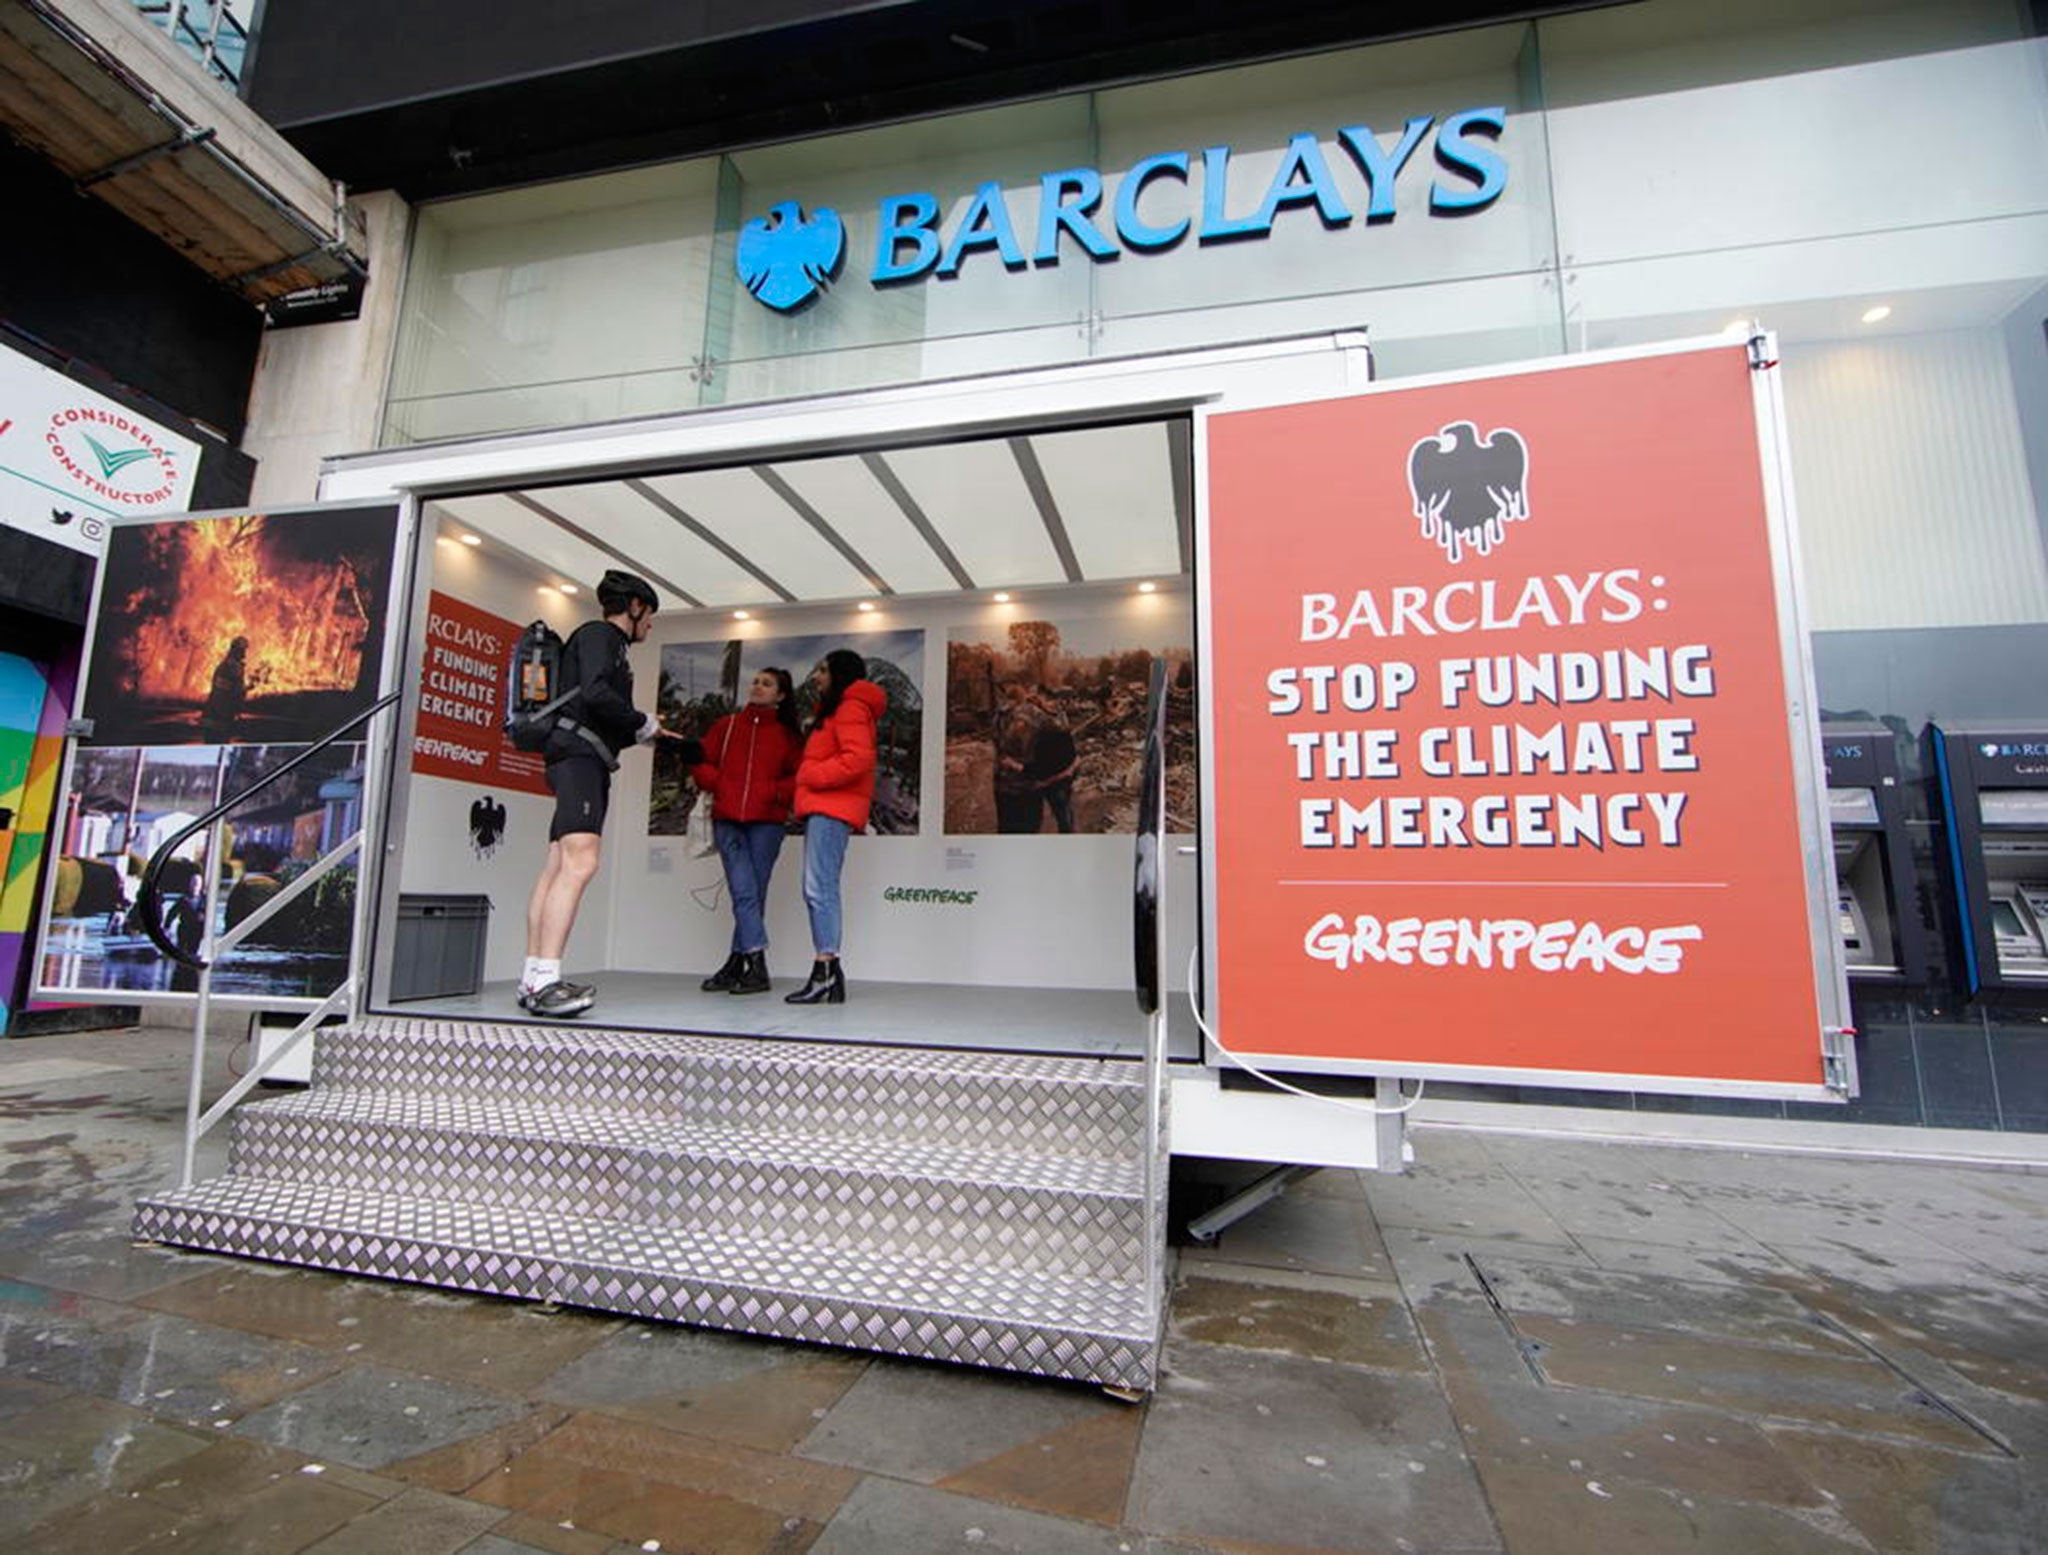 Greenpeace has been pressing Barclays to stop funding the climate emergency. Investors are increasingly doing the same thing